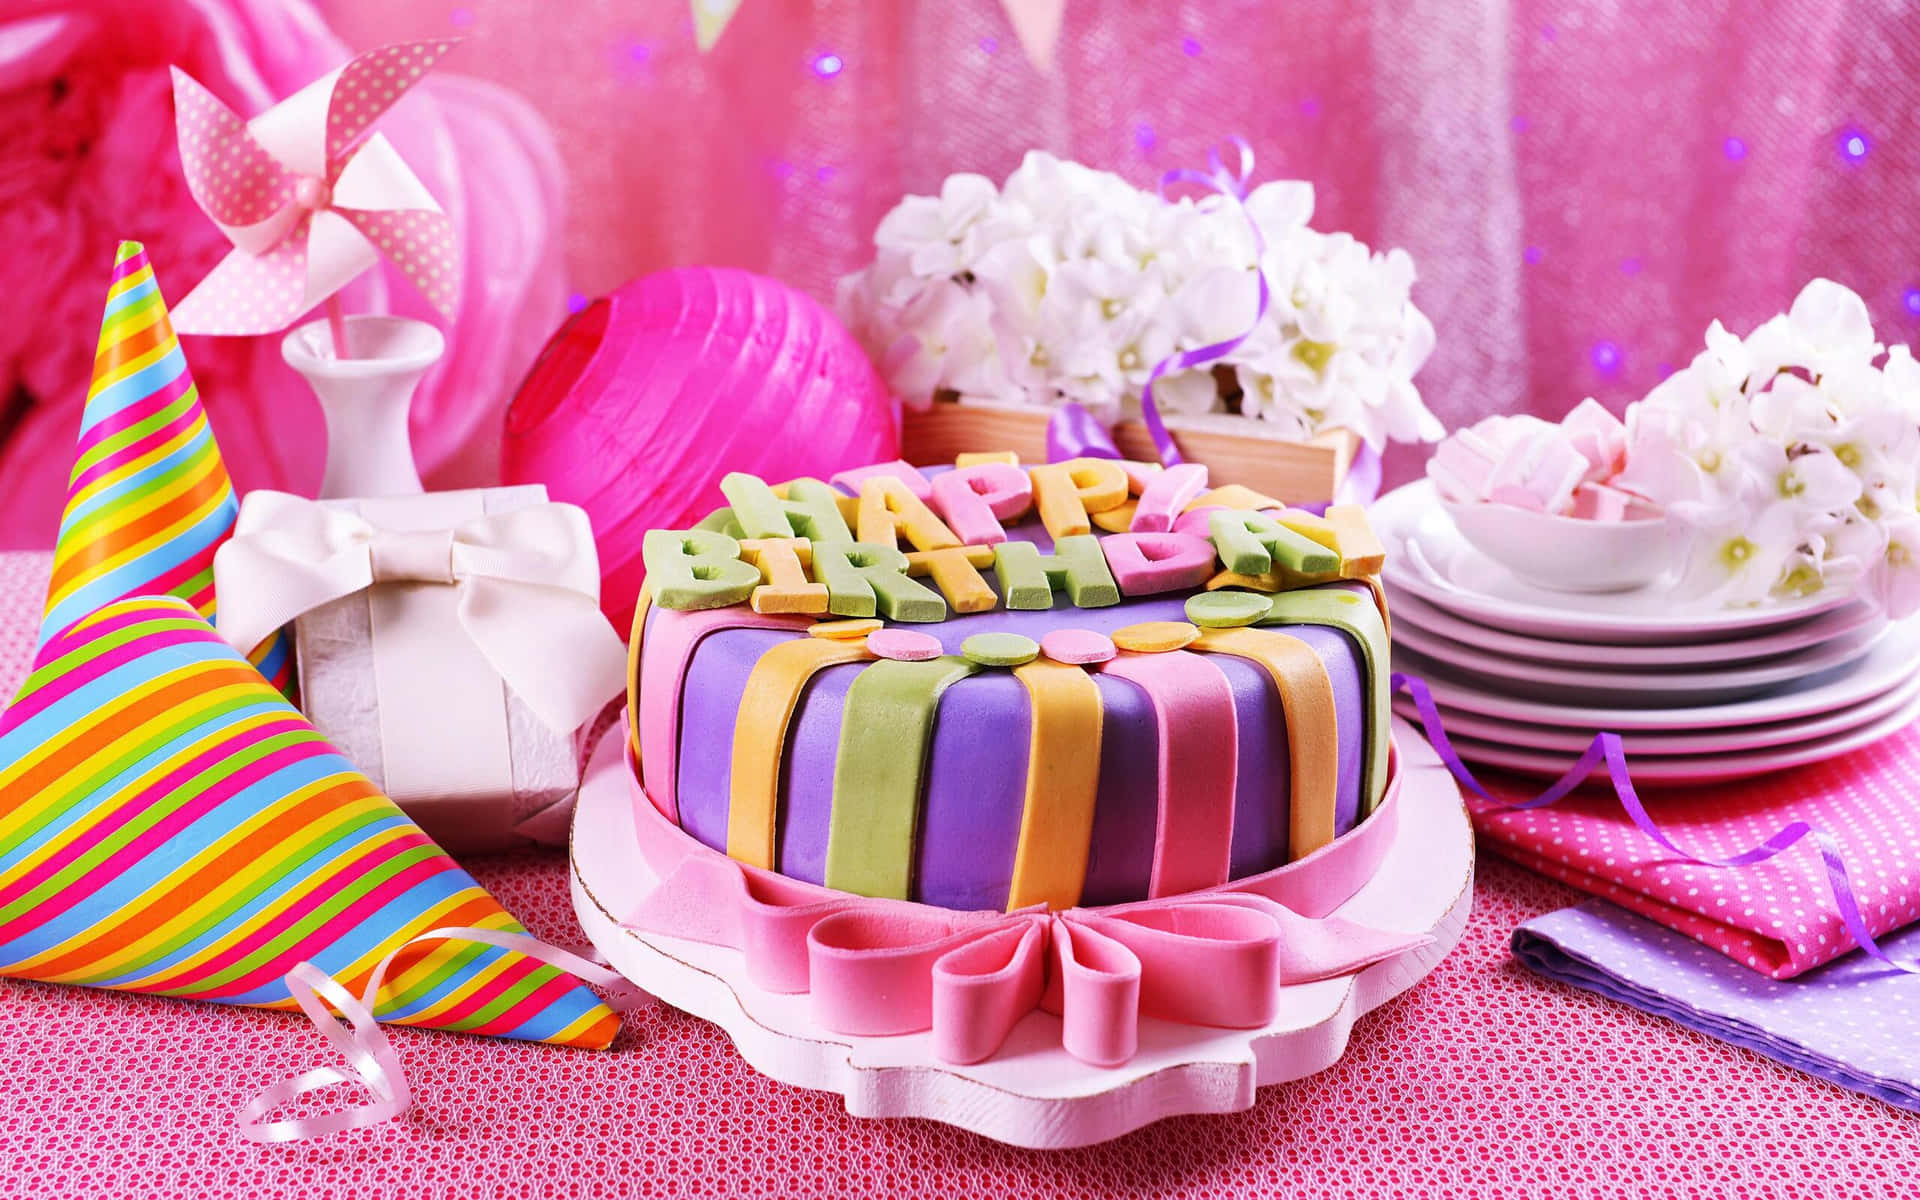 Celebrate your special day in pink!